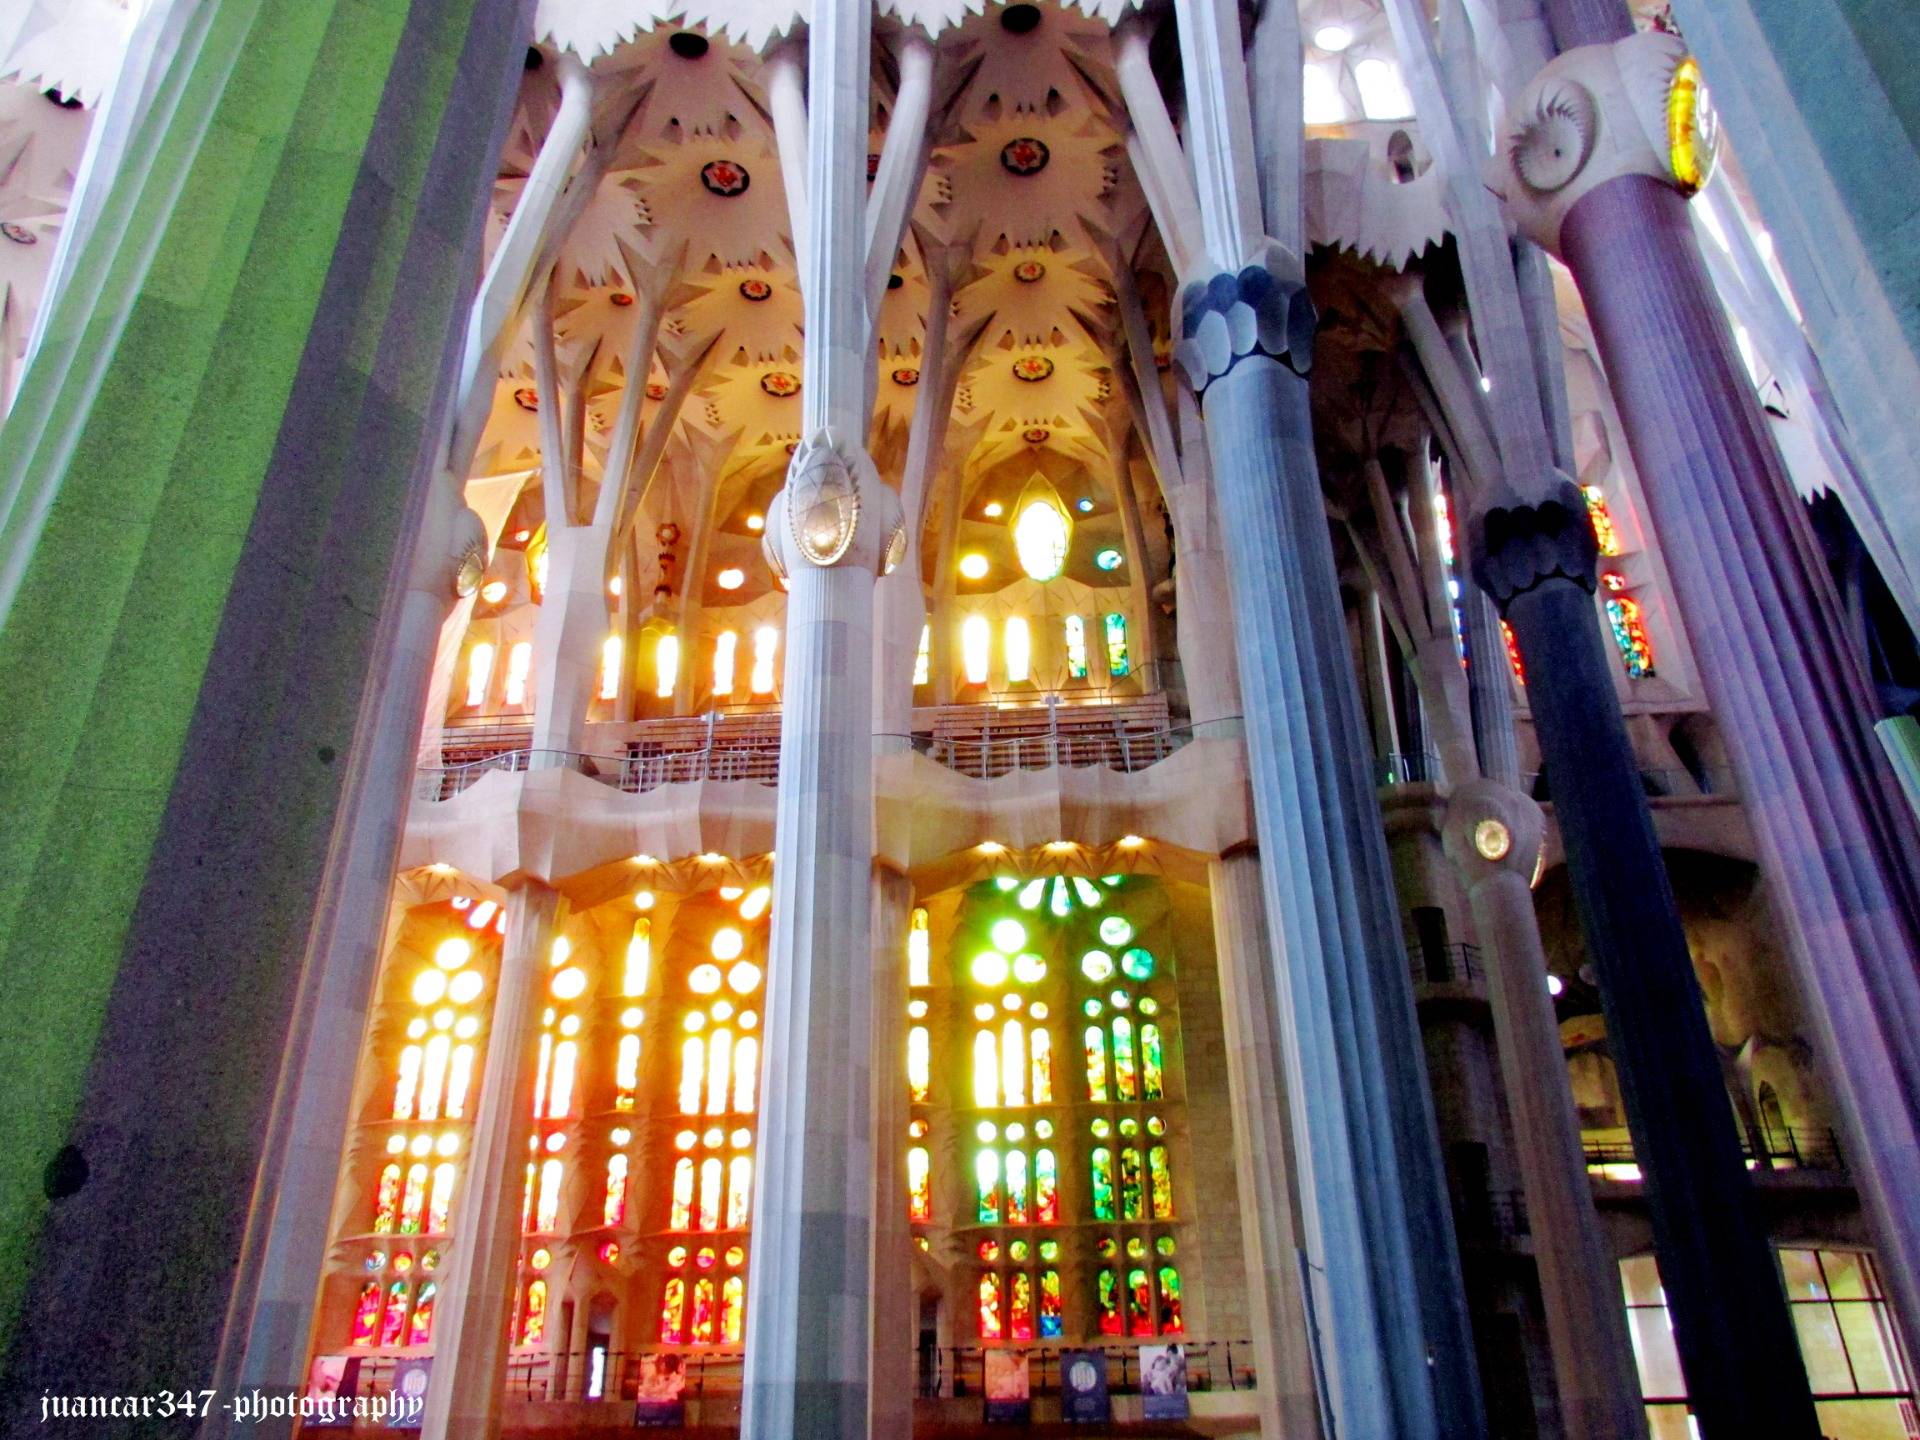 Gaudí and the stained glass windows of the Sagrada Familia